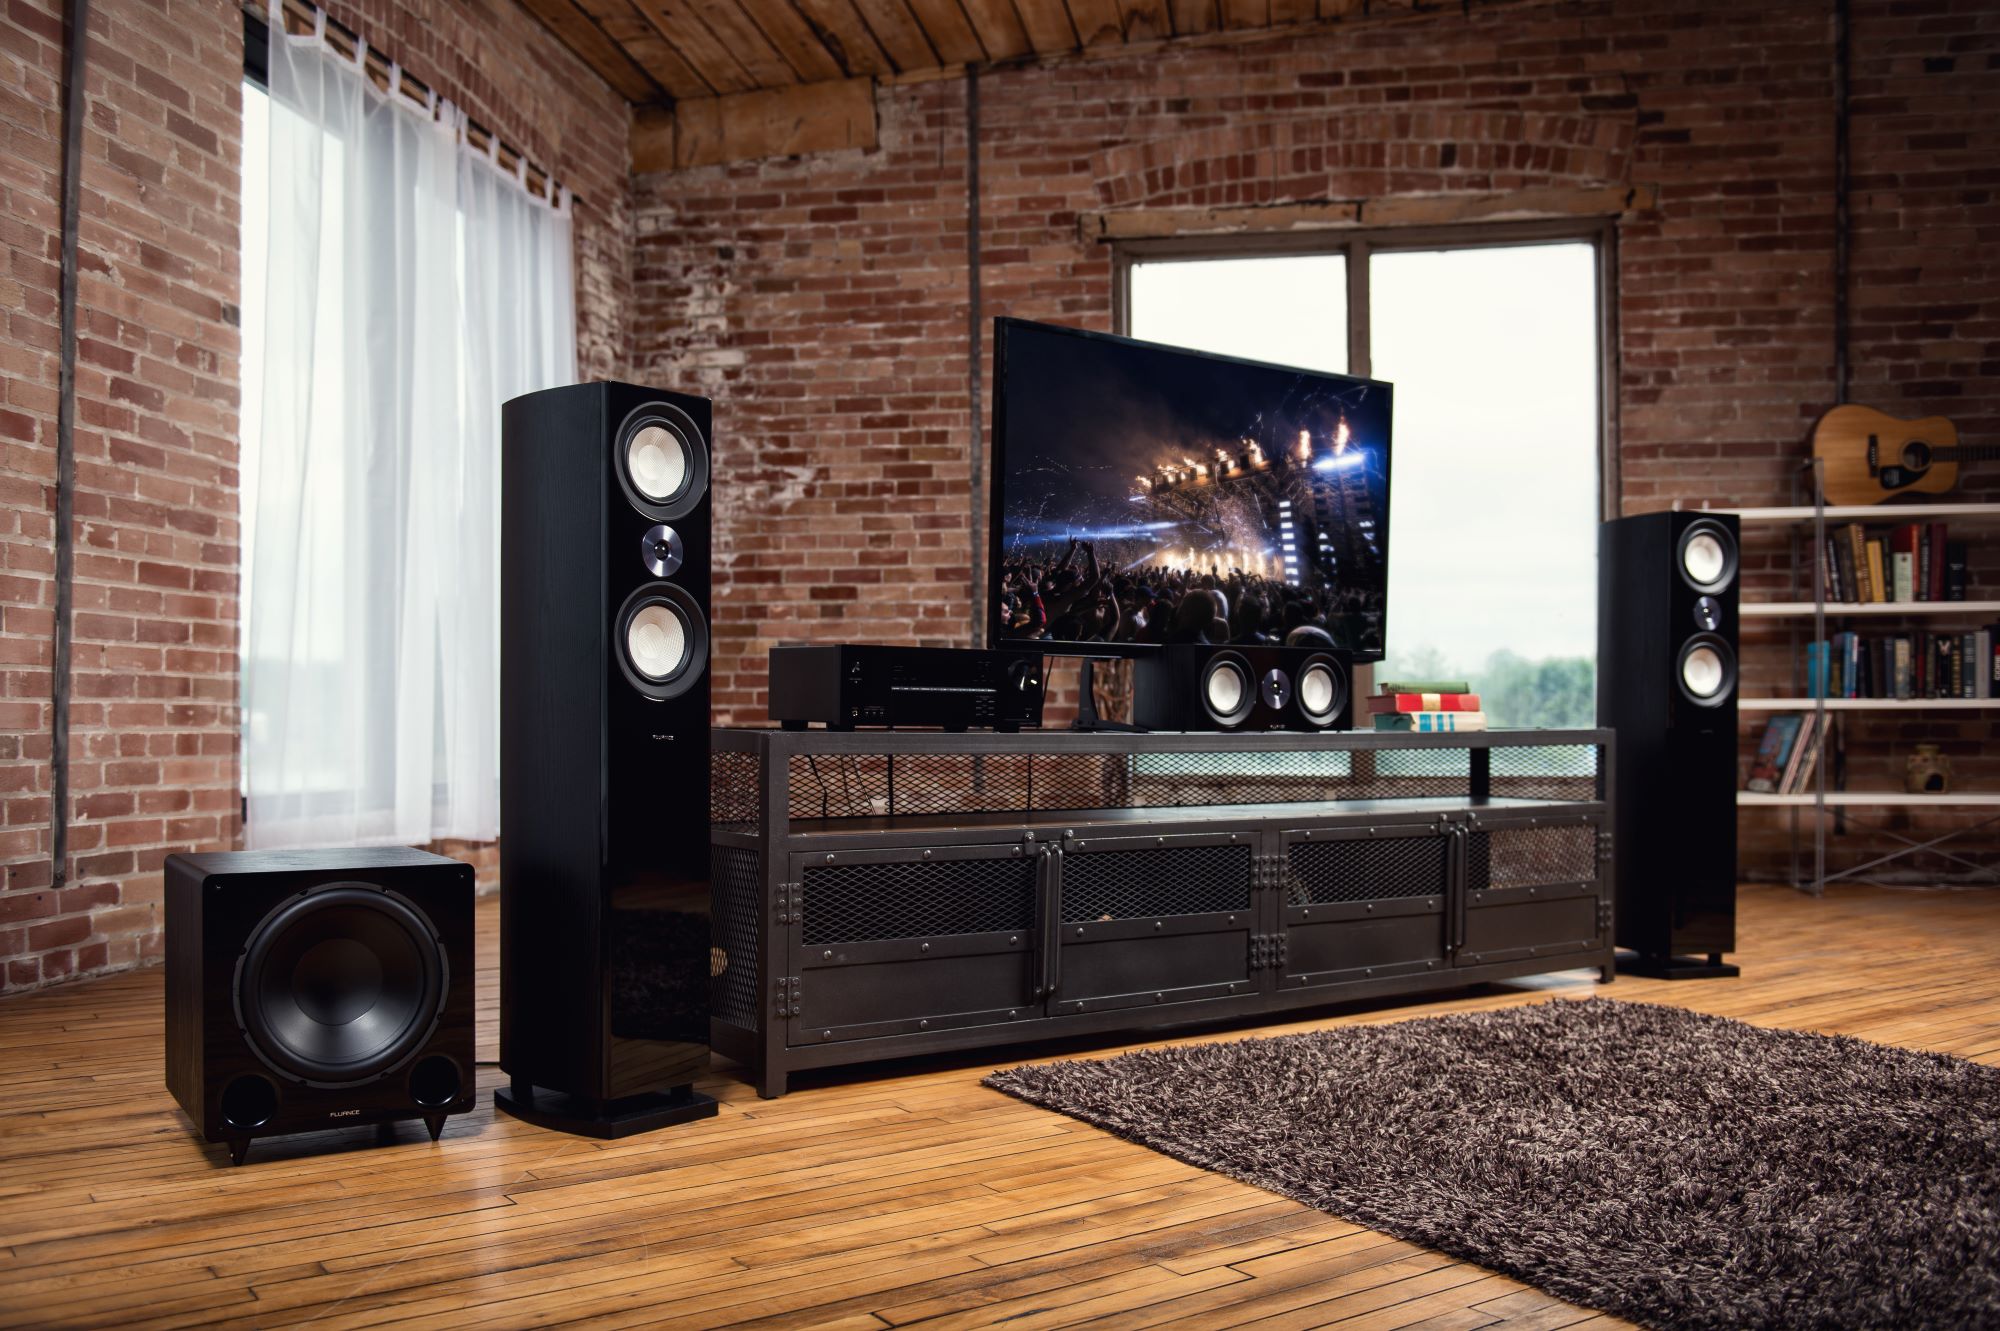 fenomeen zoeken Ontmoedigen Ultimate surround sound guide: DTS, Dolby Atmos, and more explained |  Digital Trends